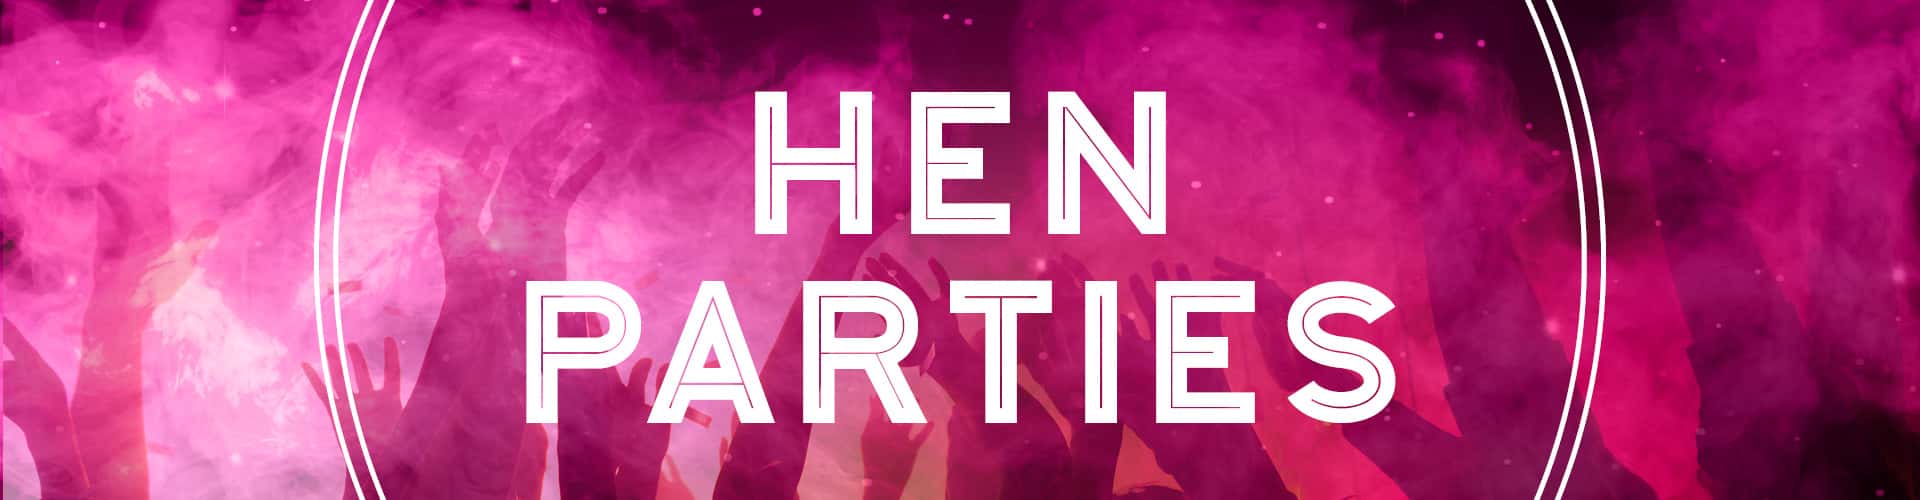 Hen Parties at Fever Exeter